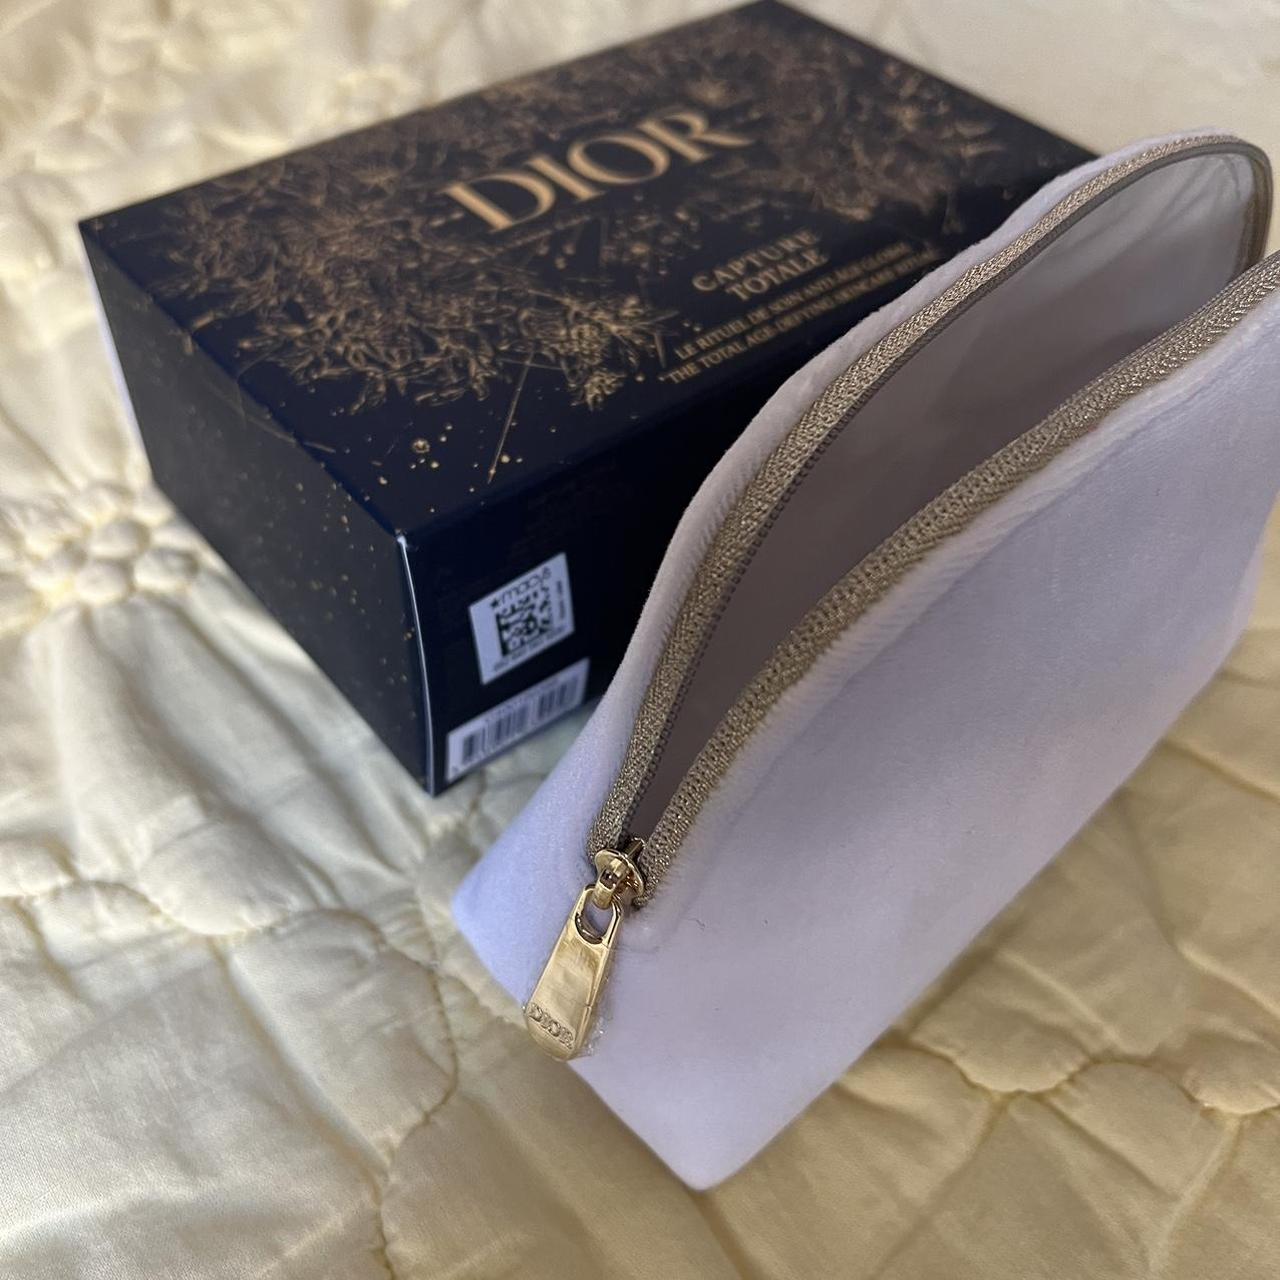 Dior Women's White and Gold Bag (5)